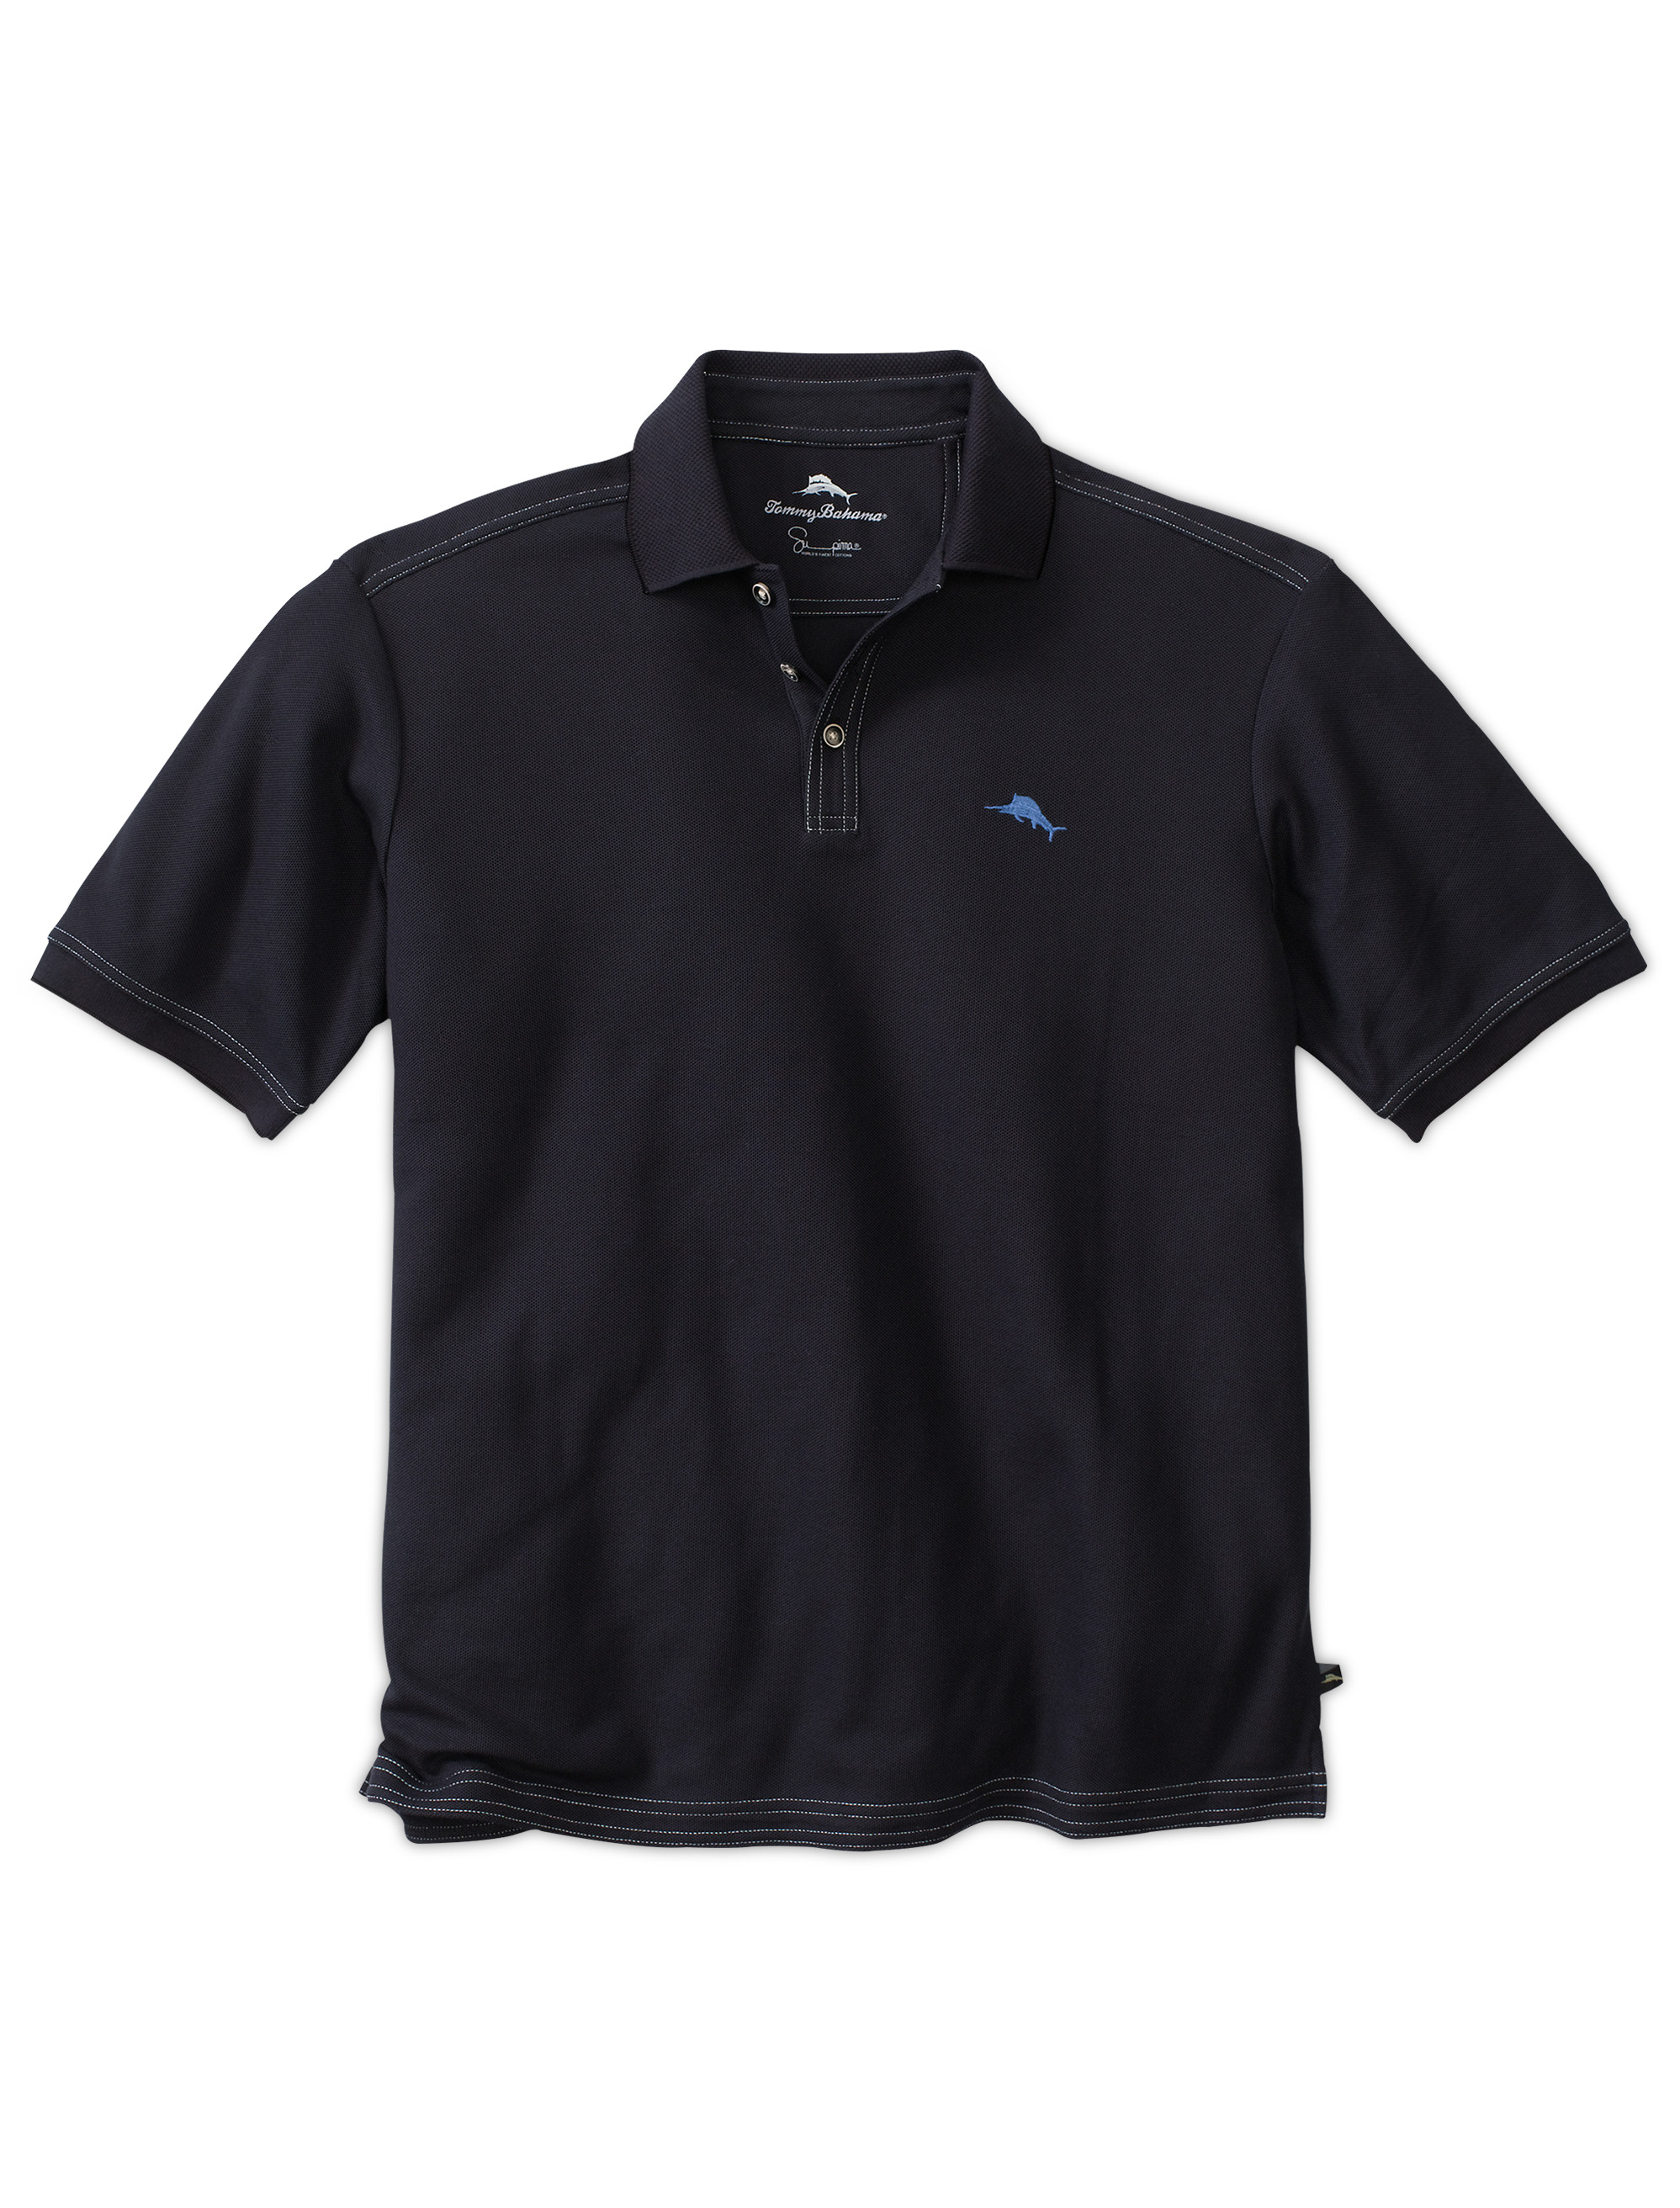 Big and Tall | Tommy Bahama Emfielder Polo Shirt | DXL Men's Clothing Store